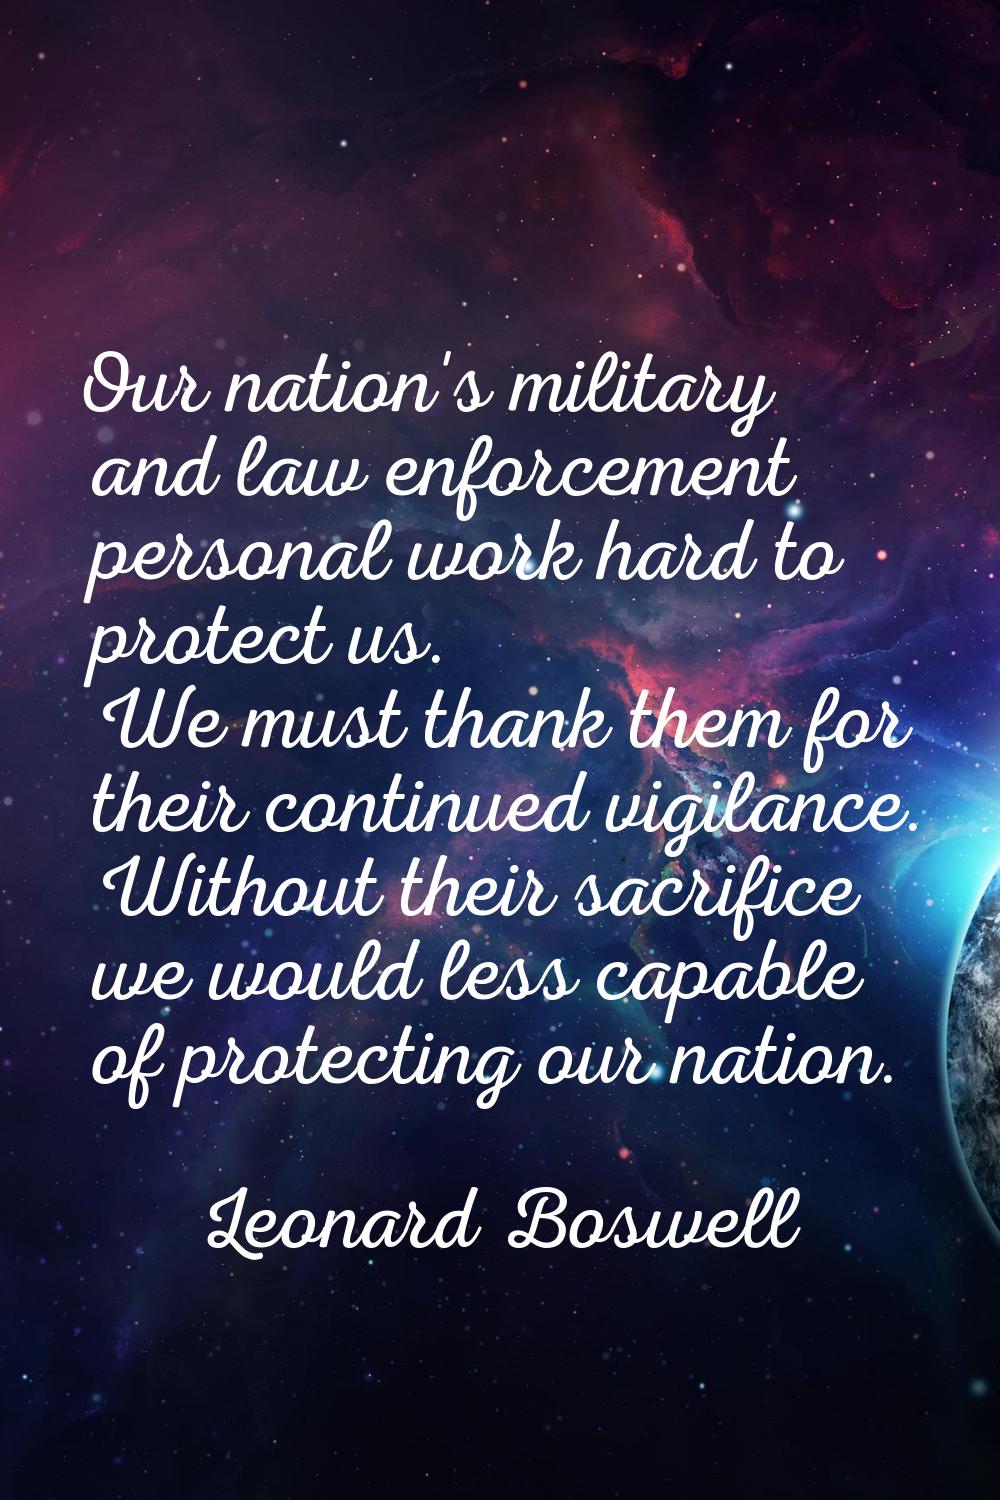 Our nation's military and law enforcement personal work hard to protect us. We must thank them for 